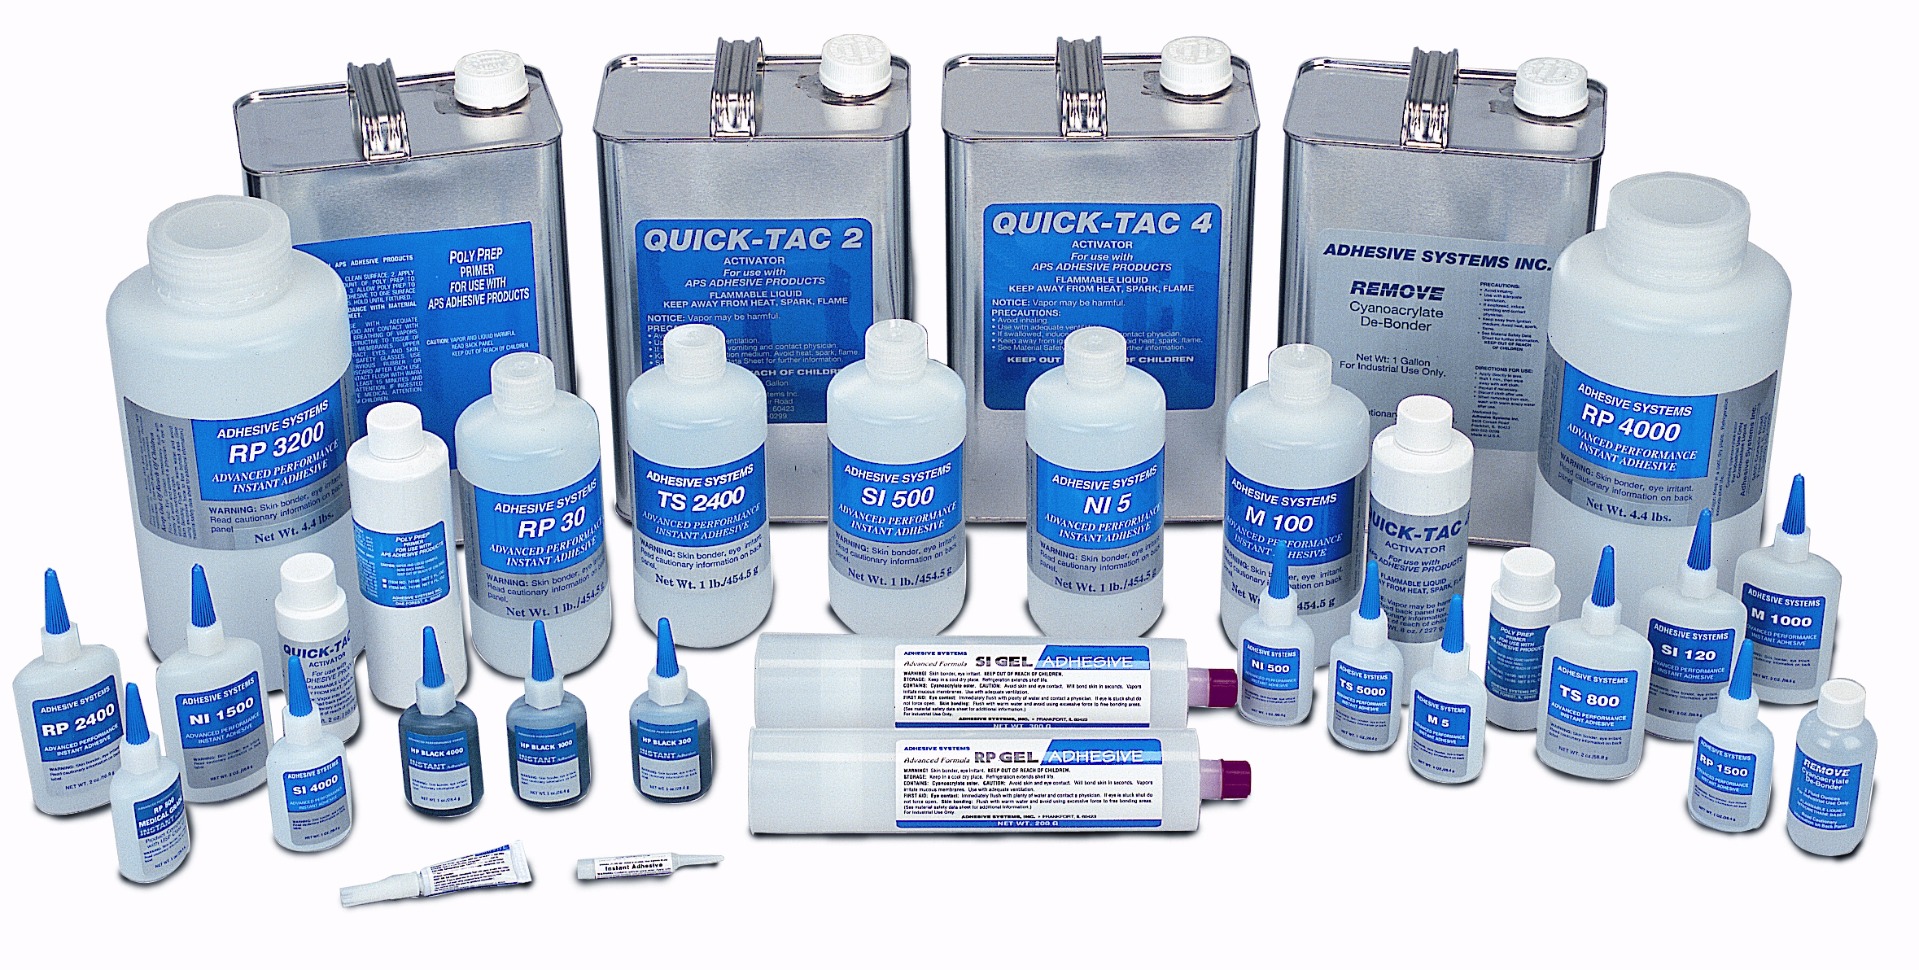 All You Need To Know About Food-Grade Adhesives - Michael Package Blog